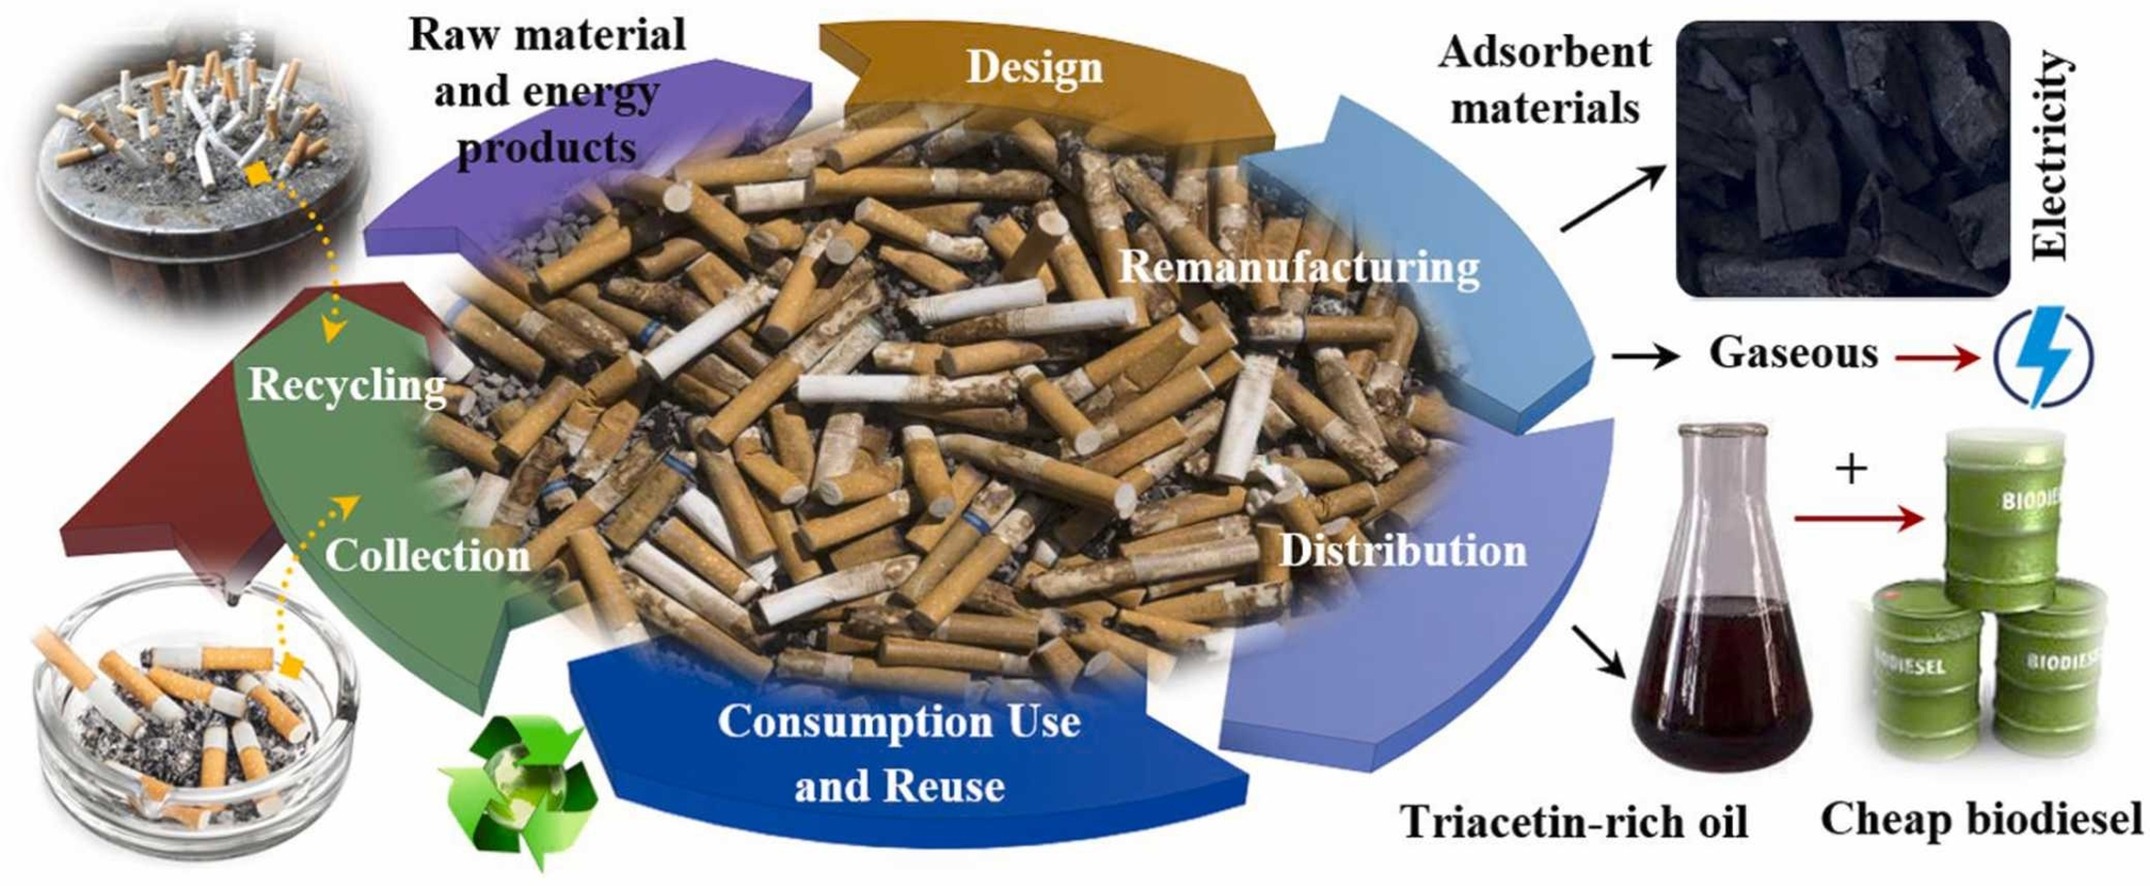 cigarette waste recycling